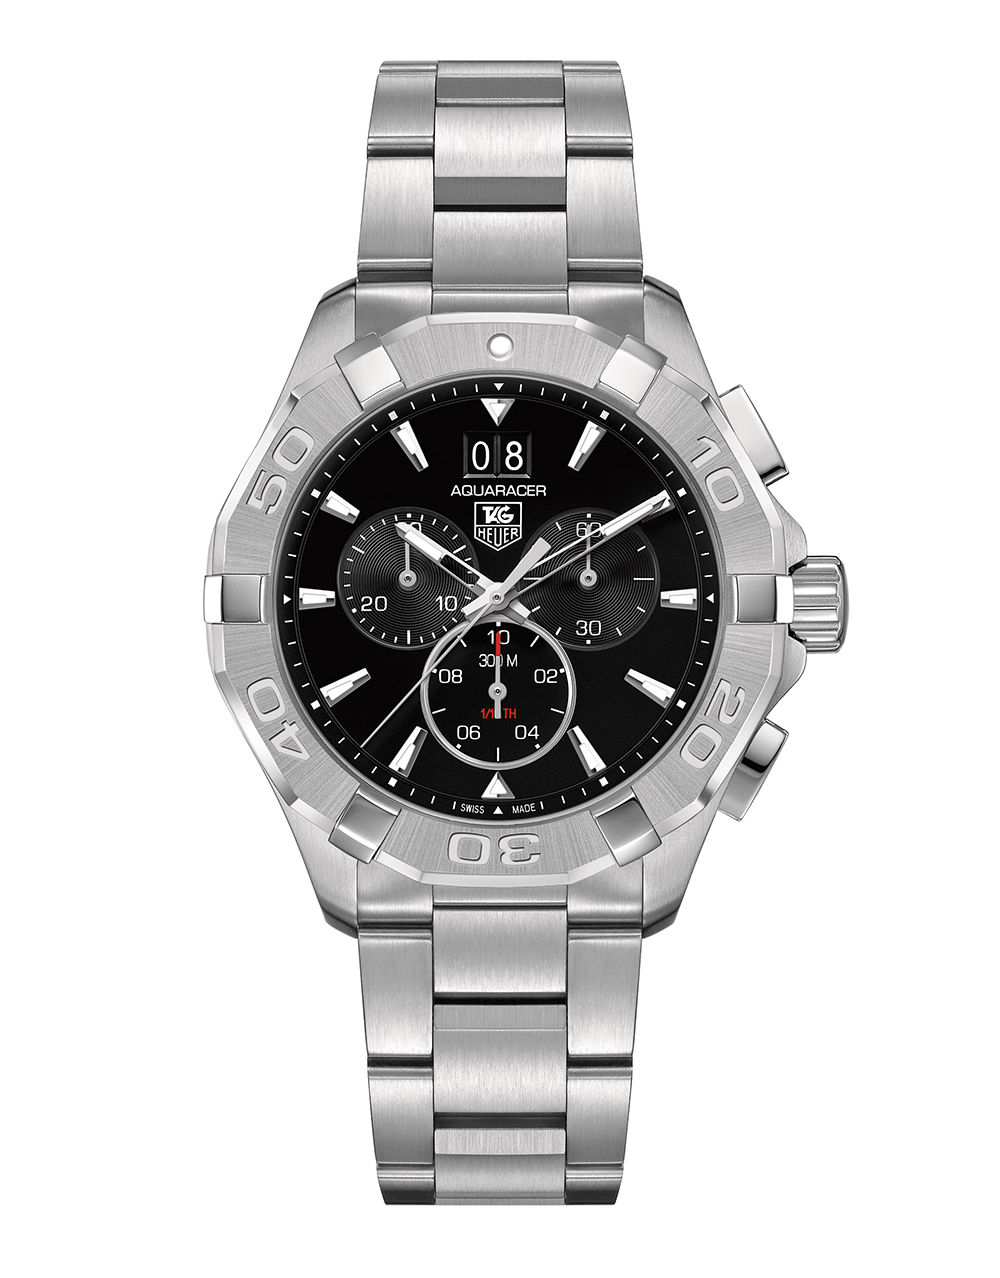 Tag Heuer: Stainless Steel Quartz Chronograph Aquaracer 43MM Watch
Clasp: Deployment
Finish: Satin and Polish
Dial Color: Black Dial